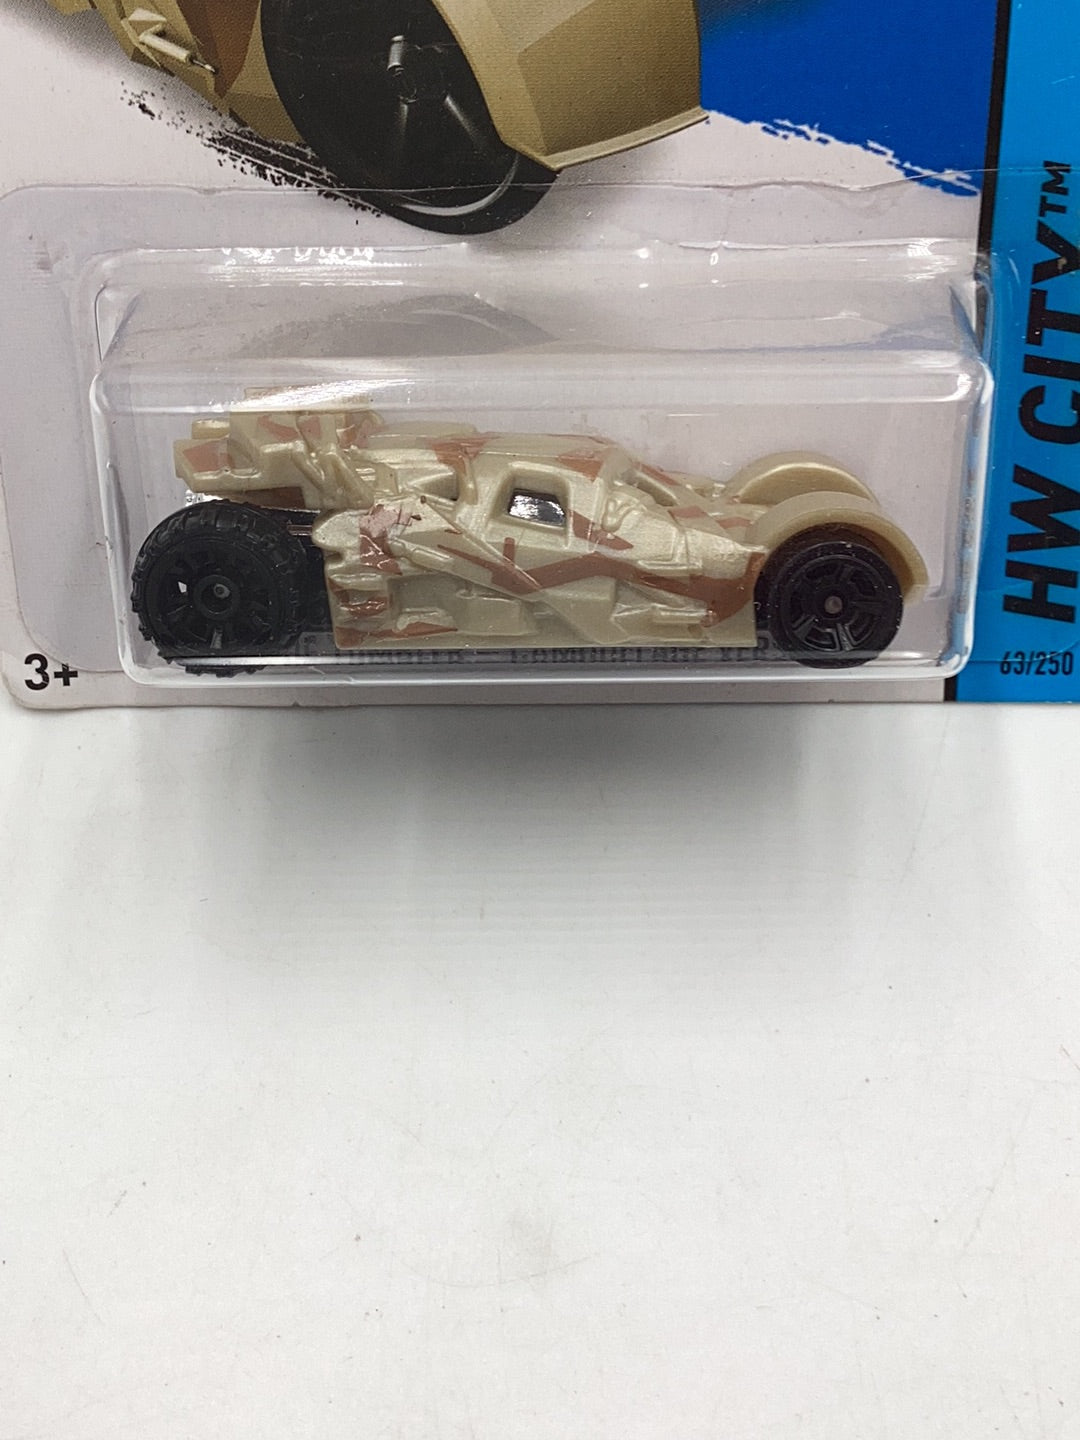 2014 Hot wheels #63 The Tumbler Camouflage Version 120E